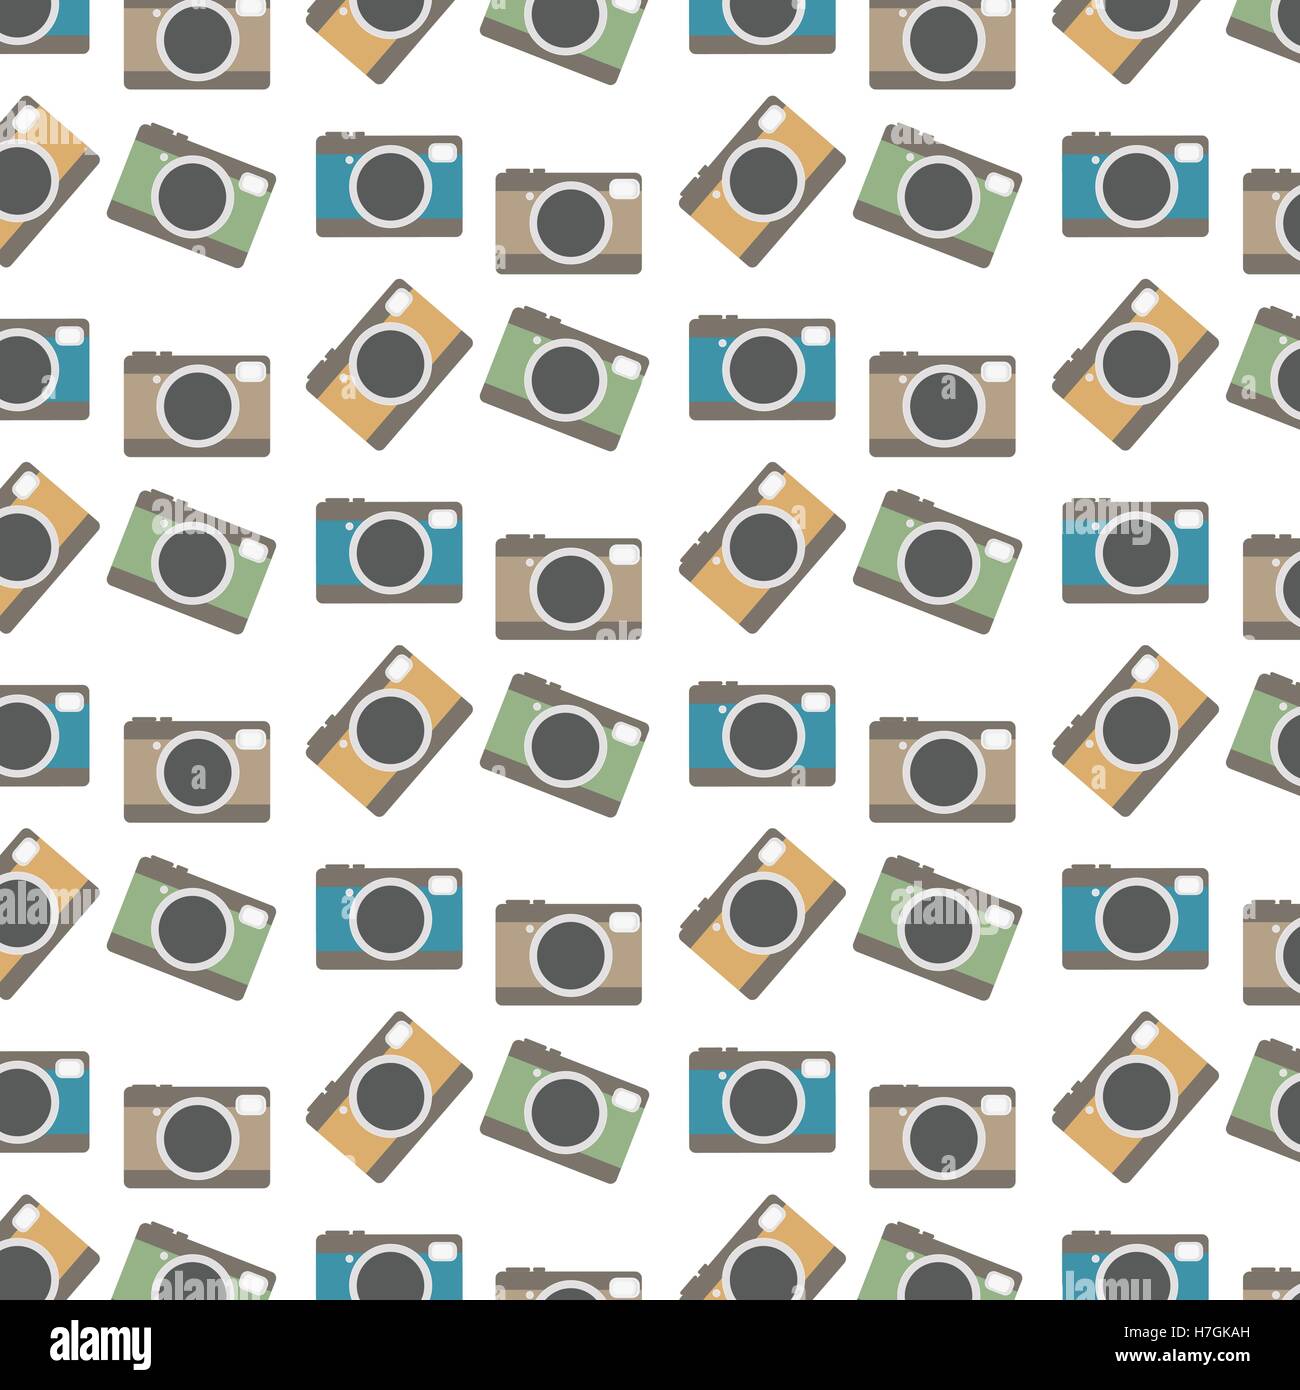 Abstract Vintage Camera Pattern Stock Vector